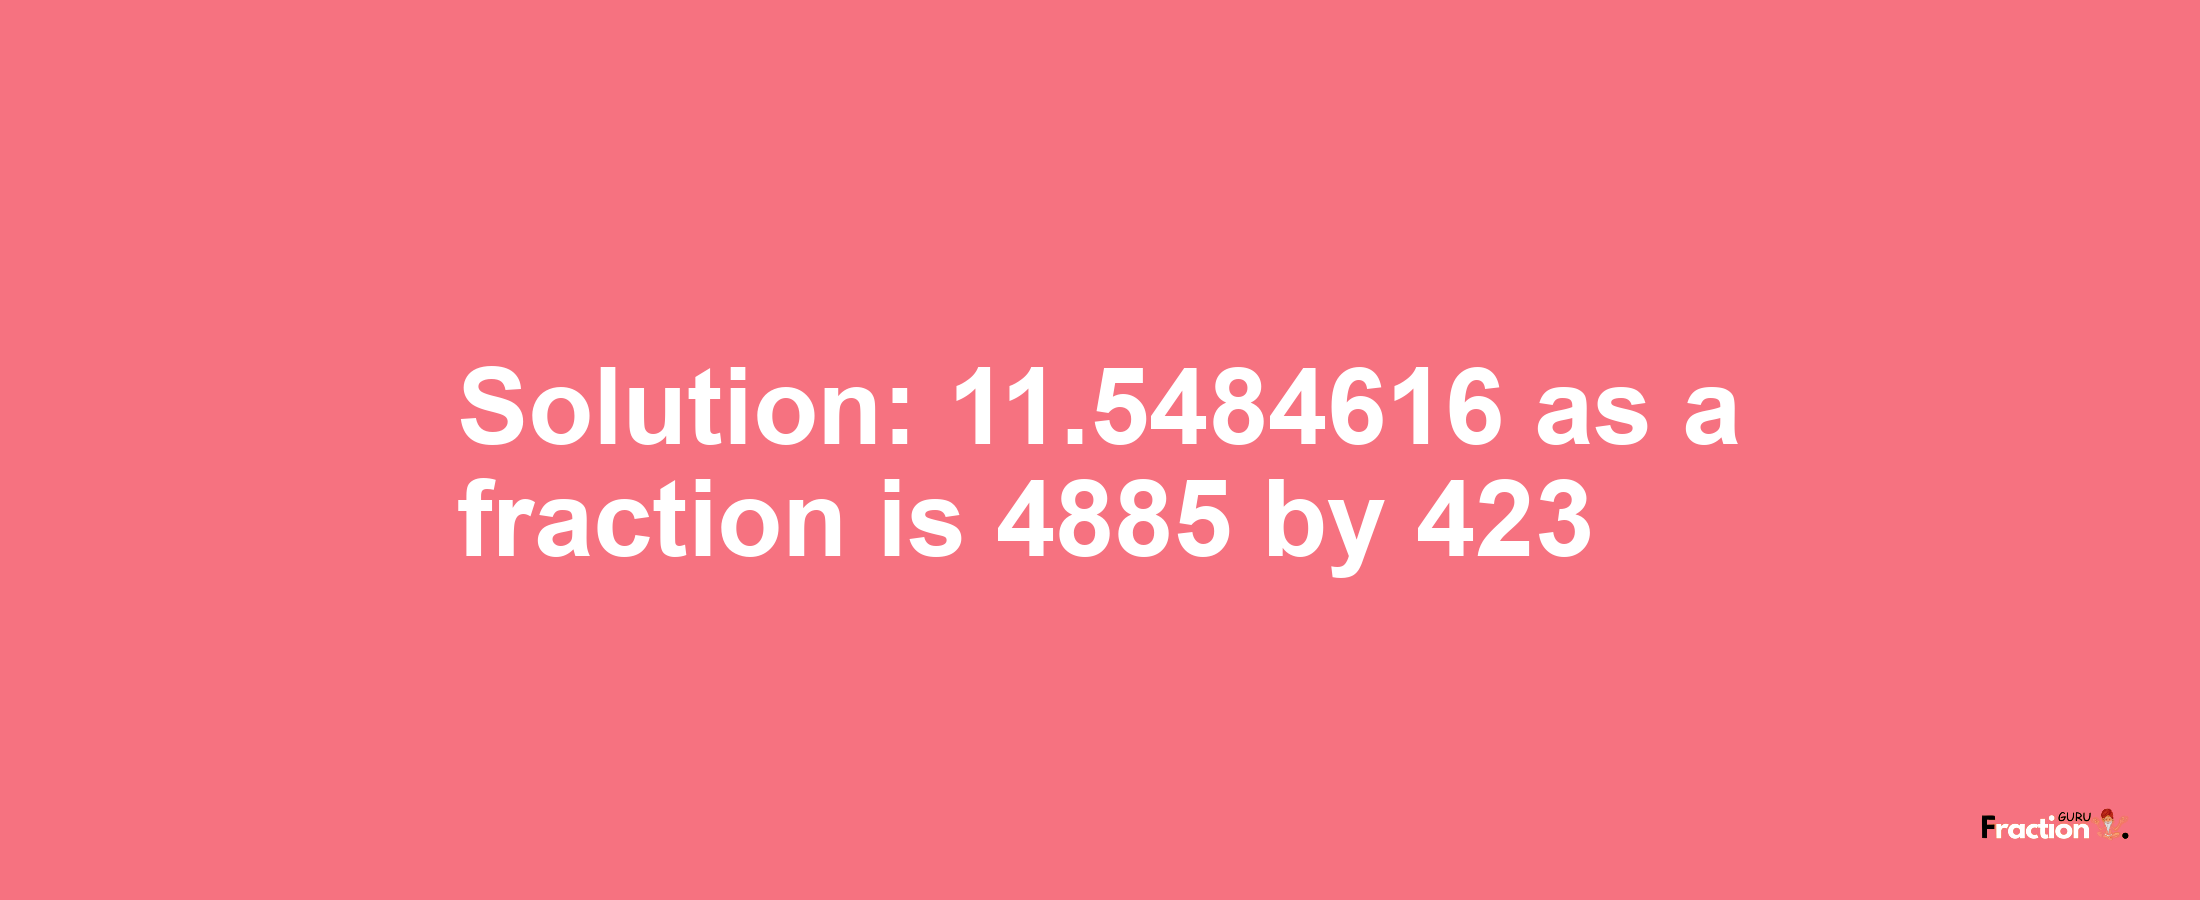 Solution:11.5484616 as a fraction is 4885/423